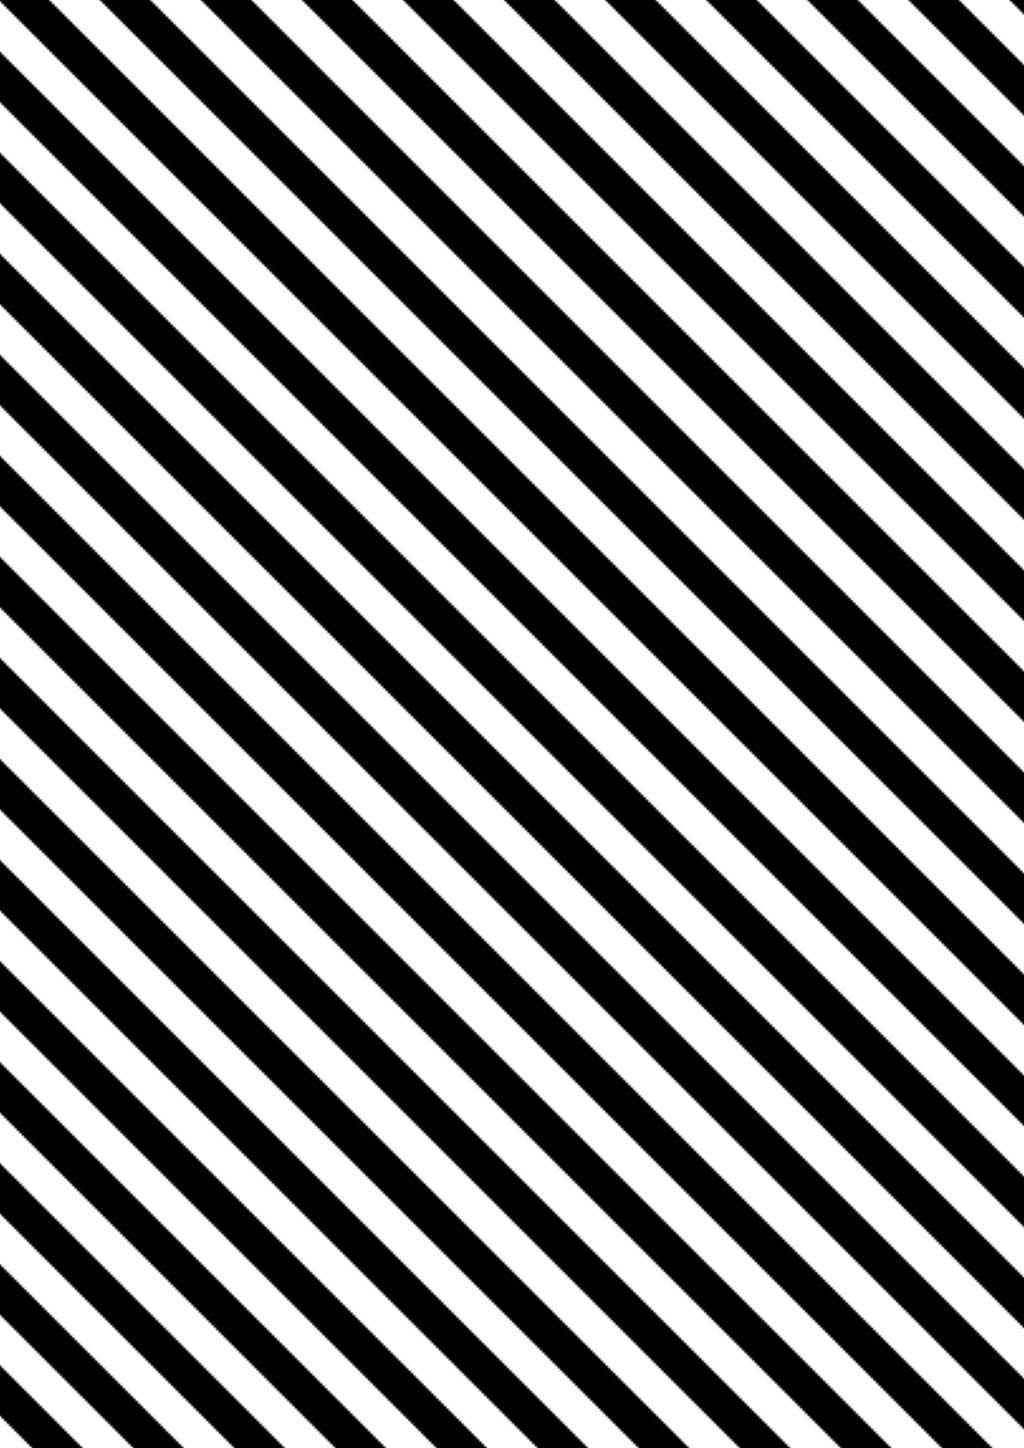 Black White Diagonal Stripes Paper Dina4 Bies By Eowyngraphics On